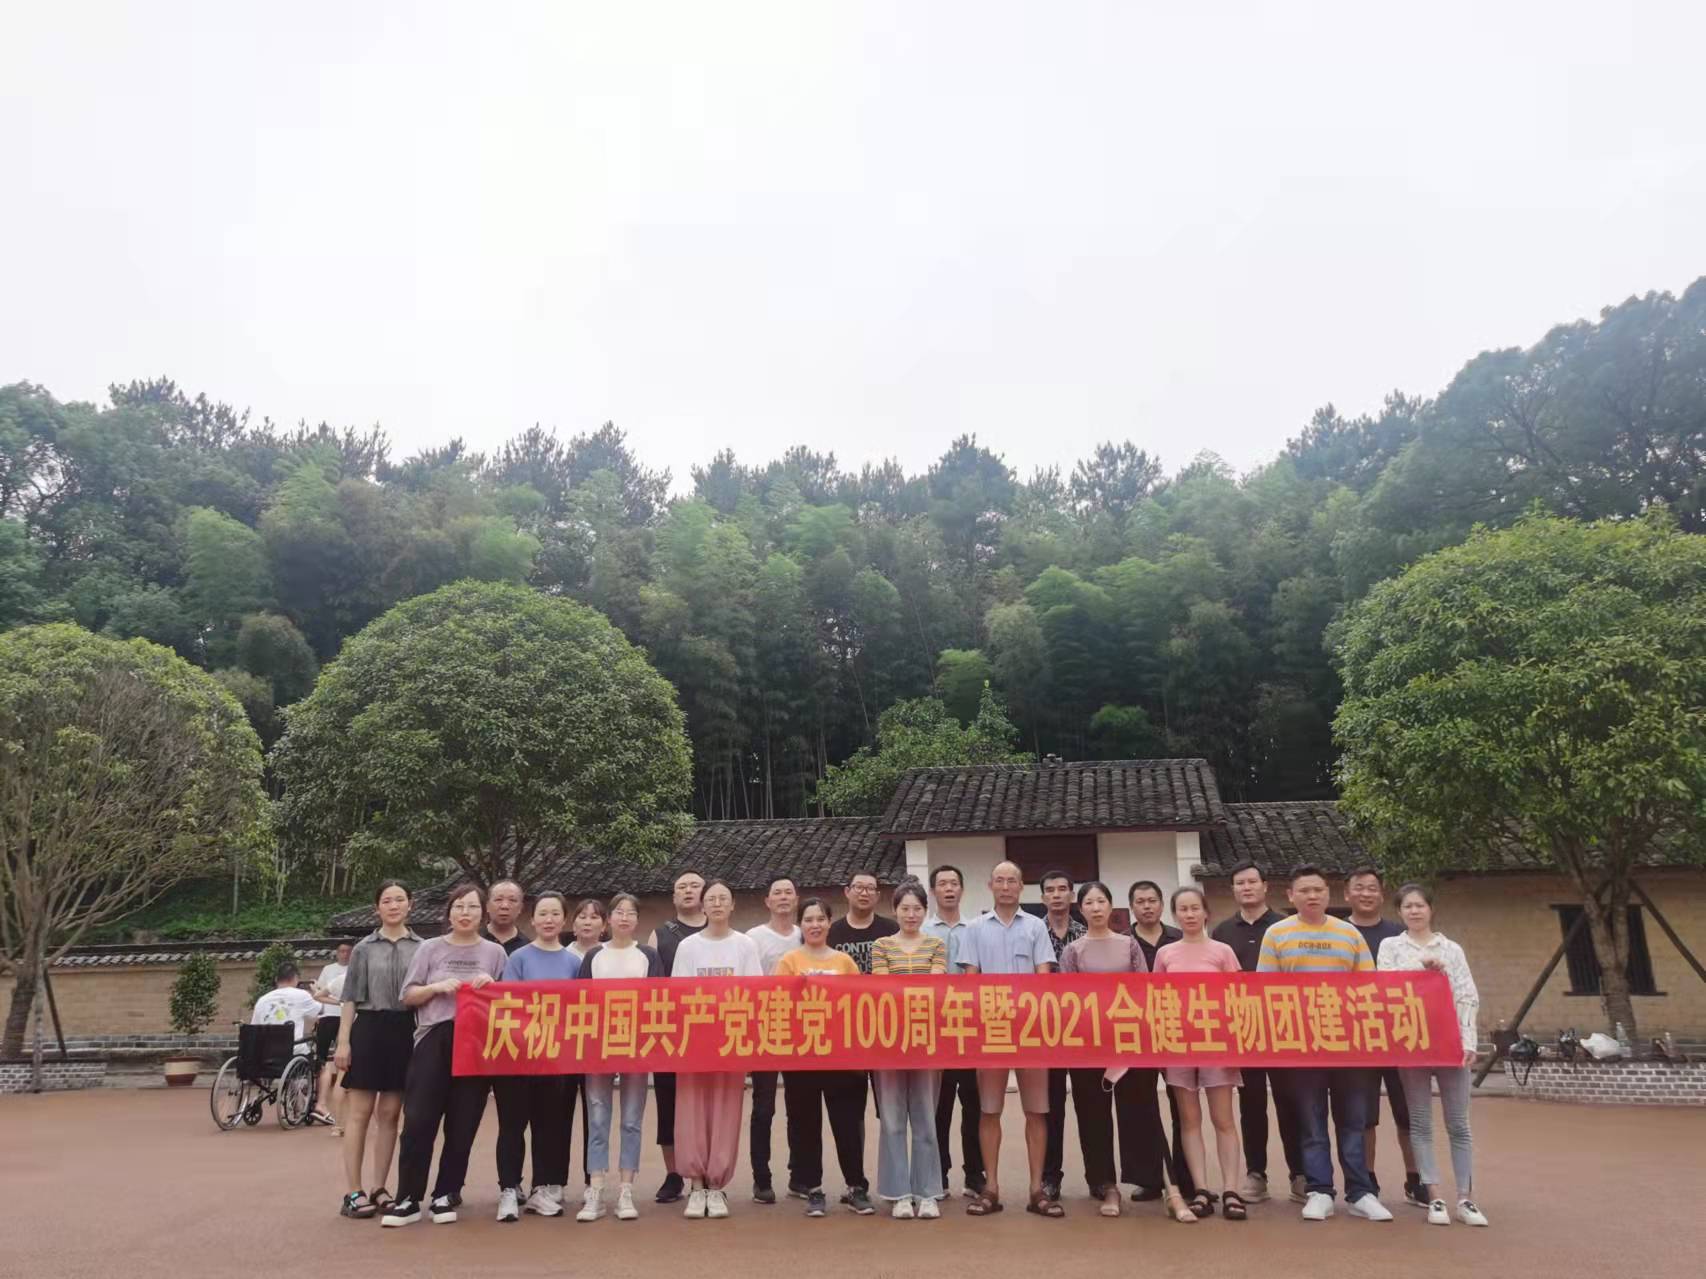 Heking 2021 celebrates the 100th anniversary of the founding of the Communist Party of China